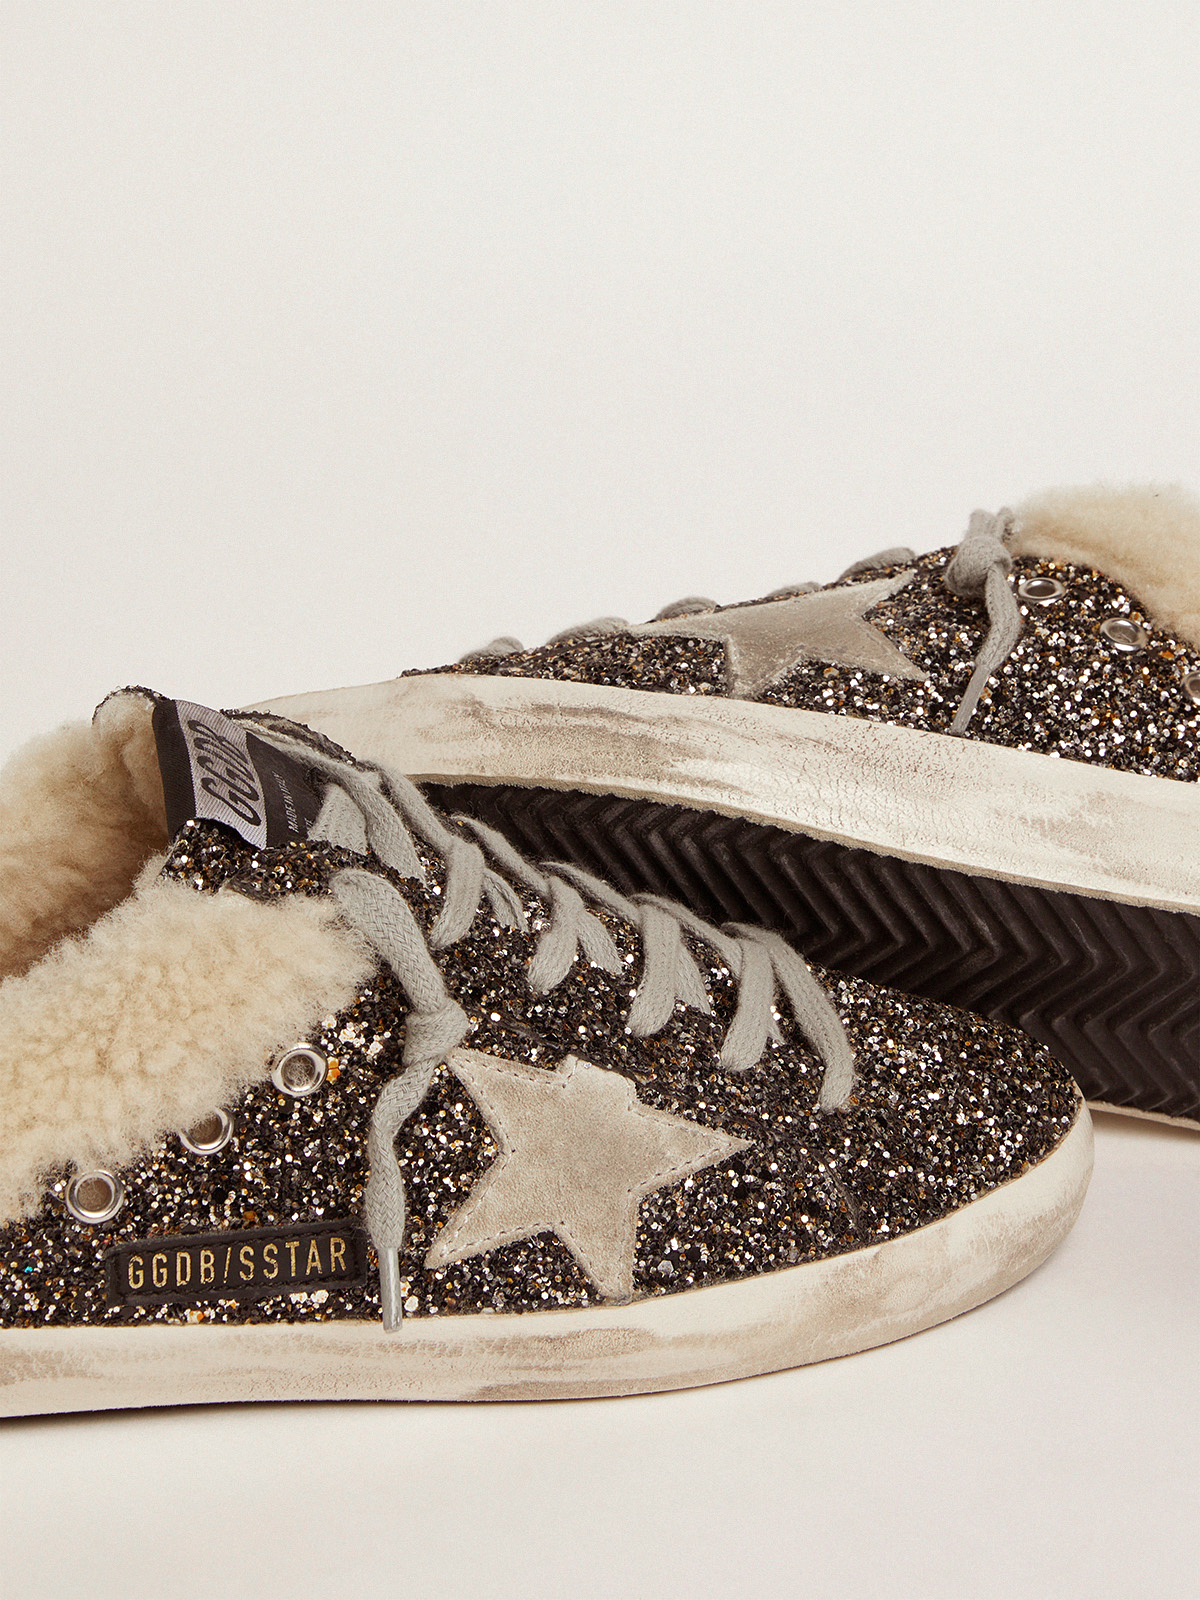 Women\'s Super-Star Sabot with glitter and shearling interior | Golden Goose